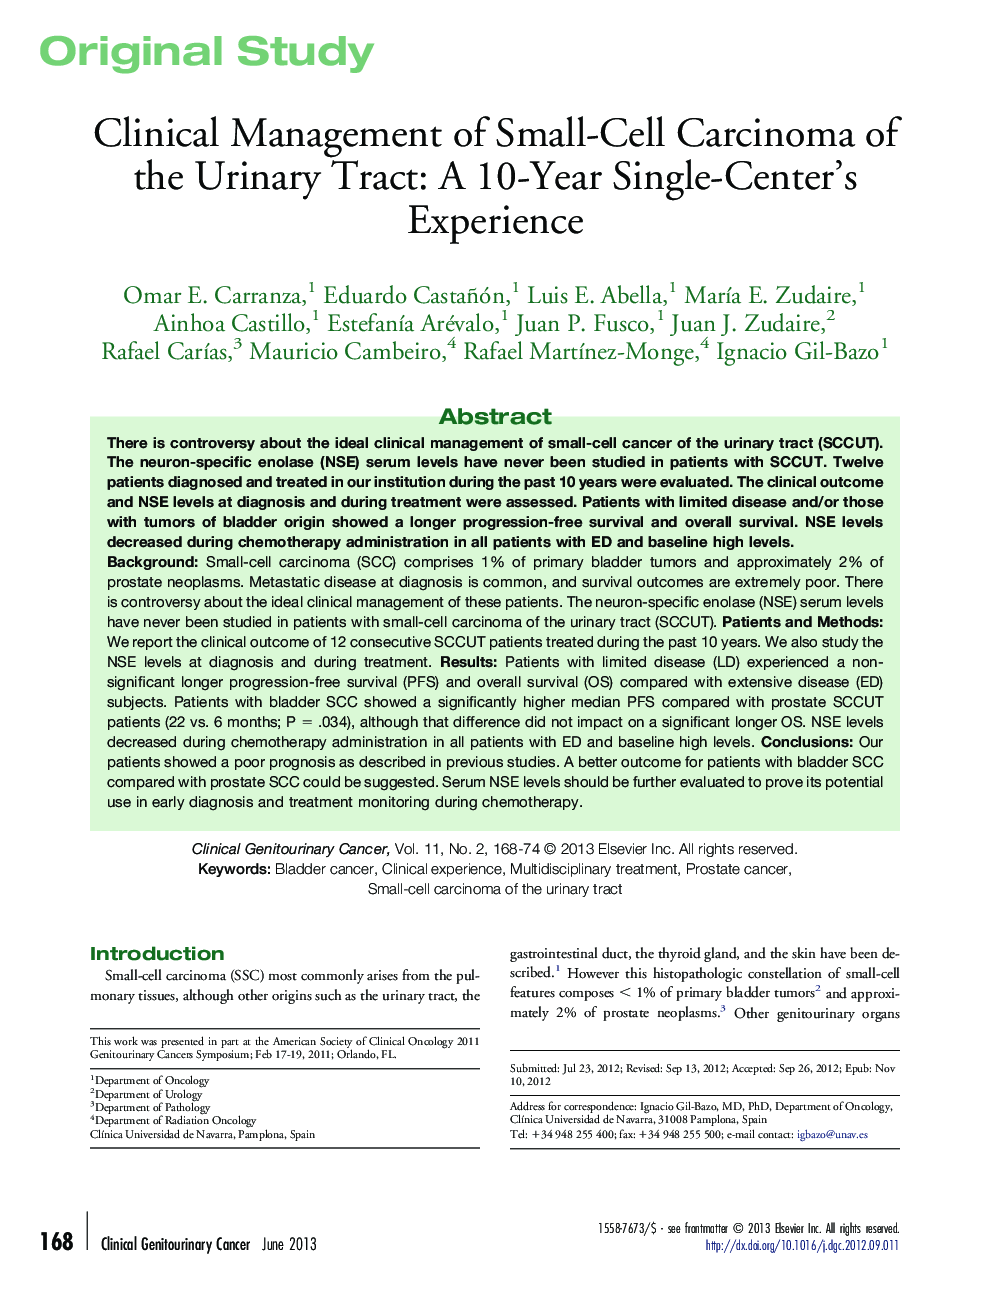 Clinical Management of Small-Cell Carcinoma of the Urinary Tract: A 10-Year Single-Center's Experience